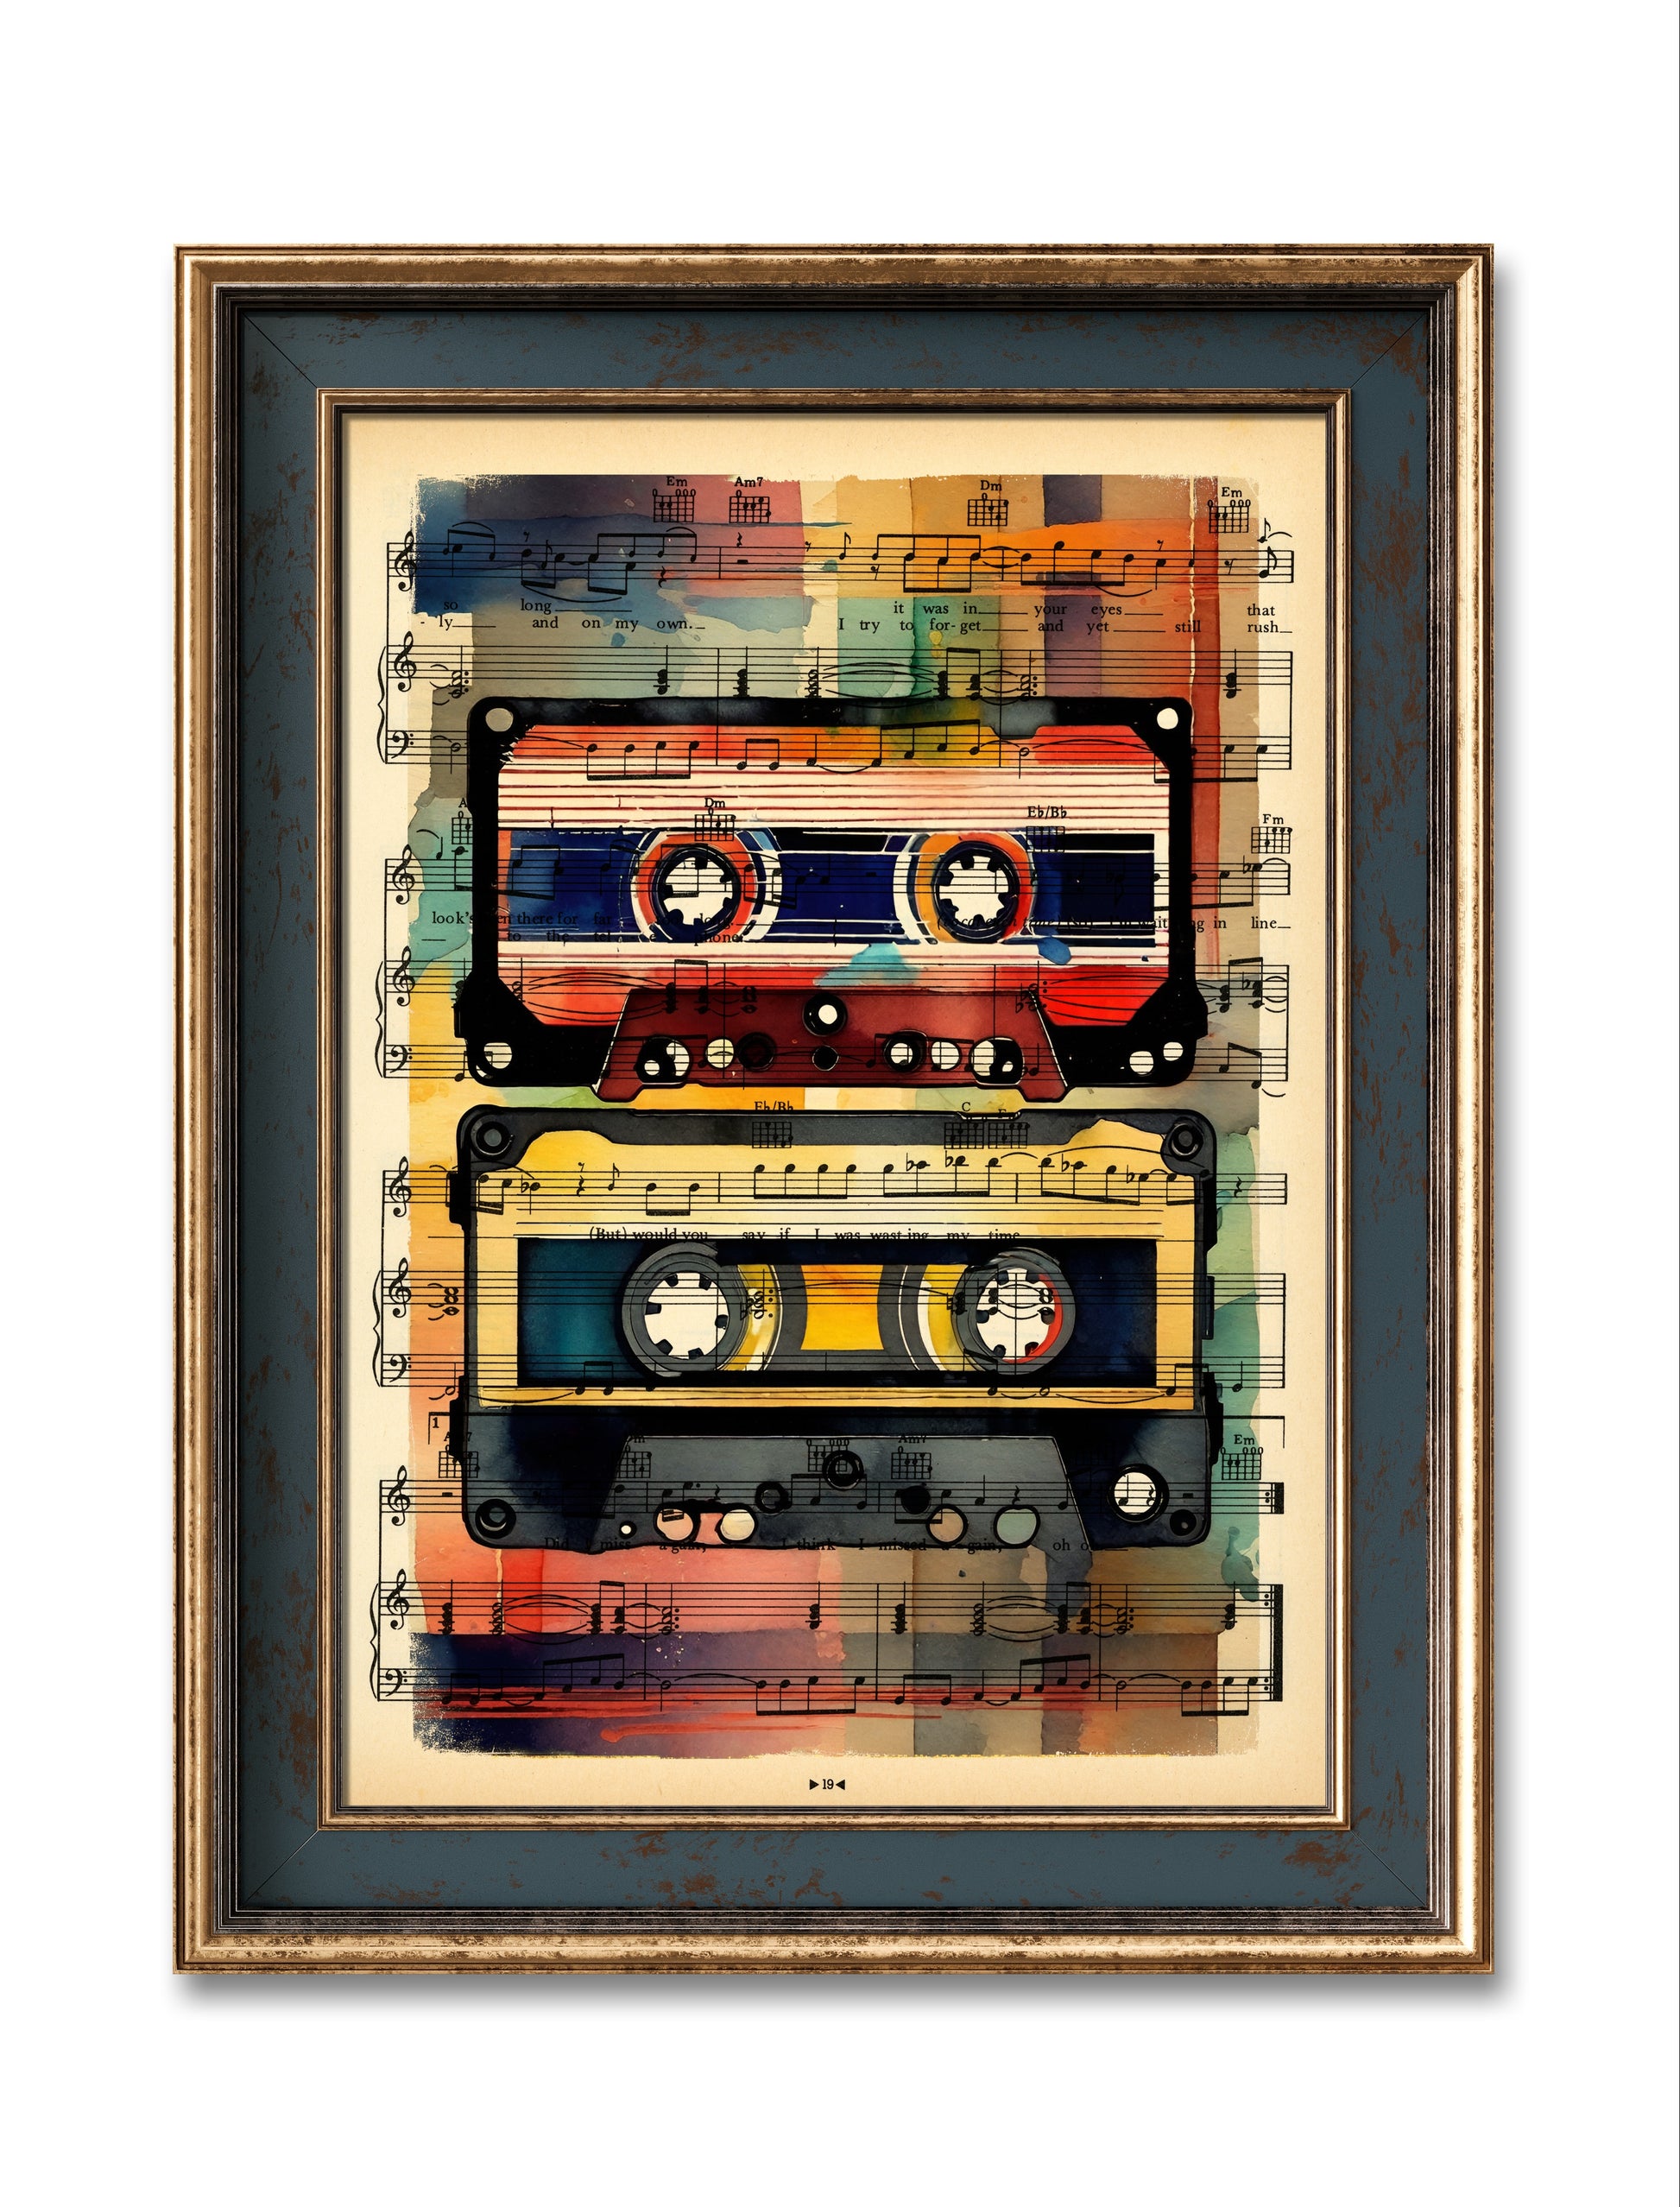 Let HiFi Retro Audio MixTape transport you back to the golden age of music.